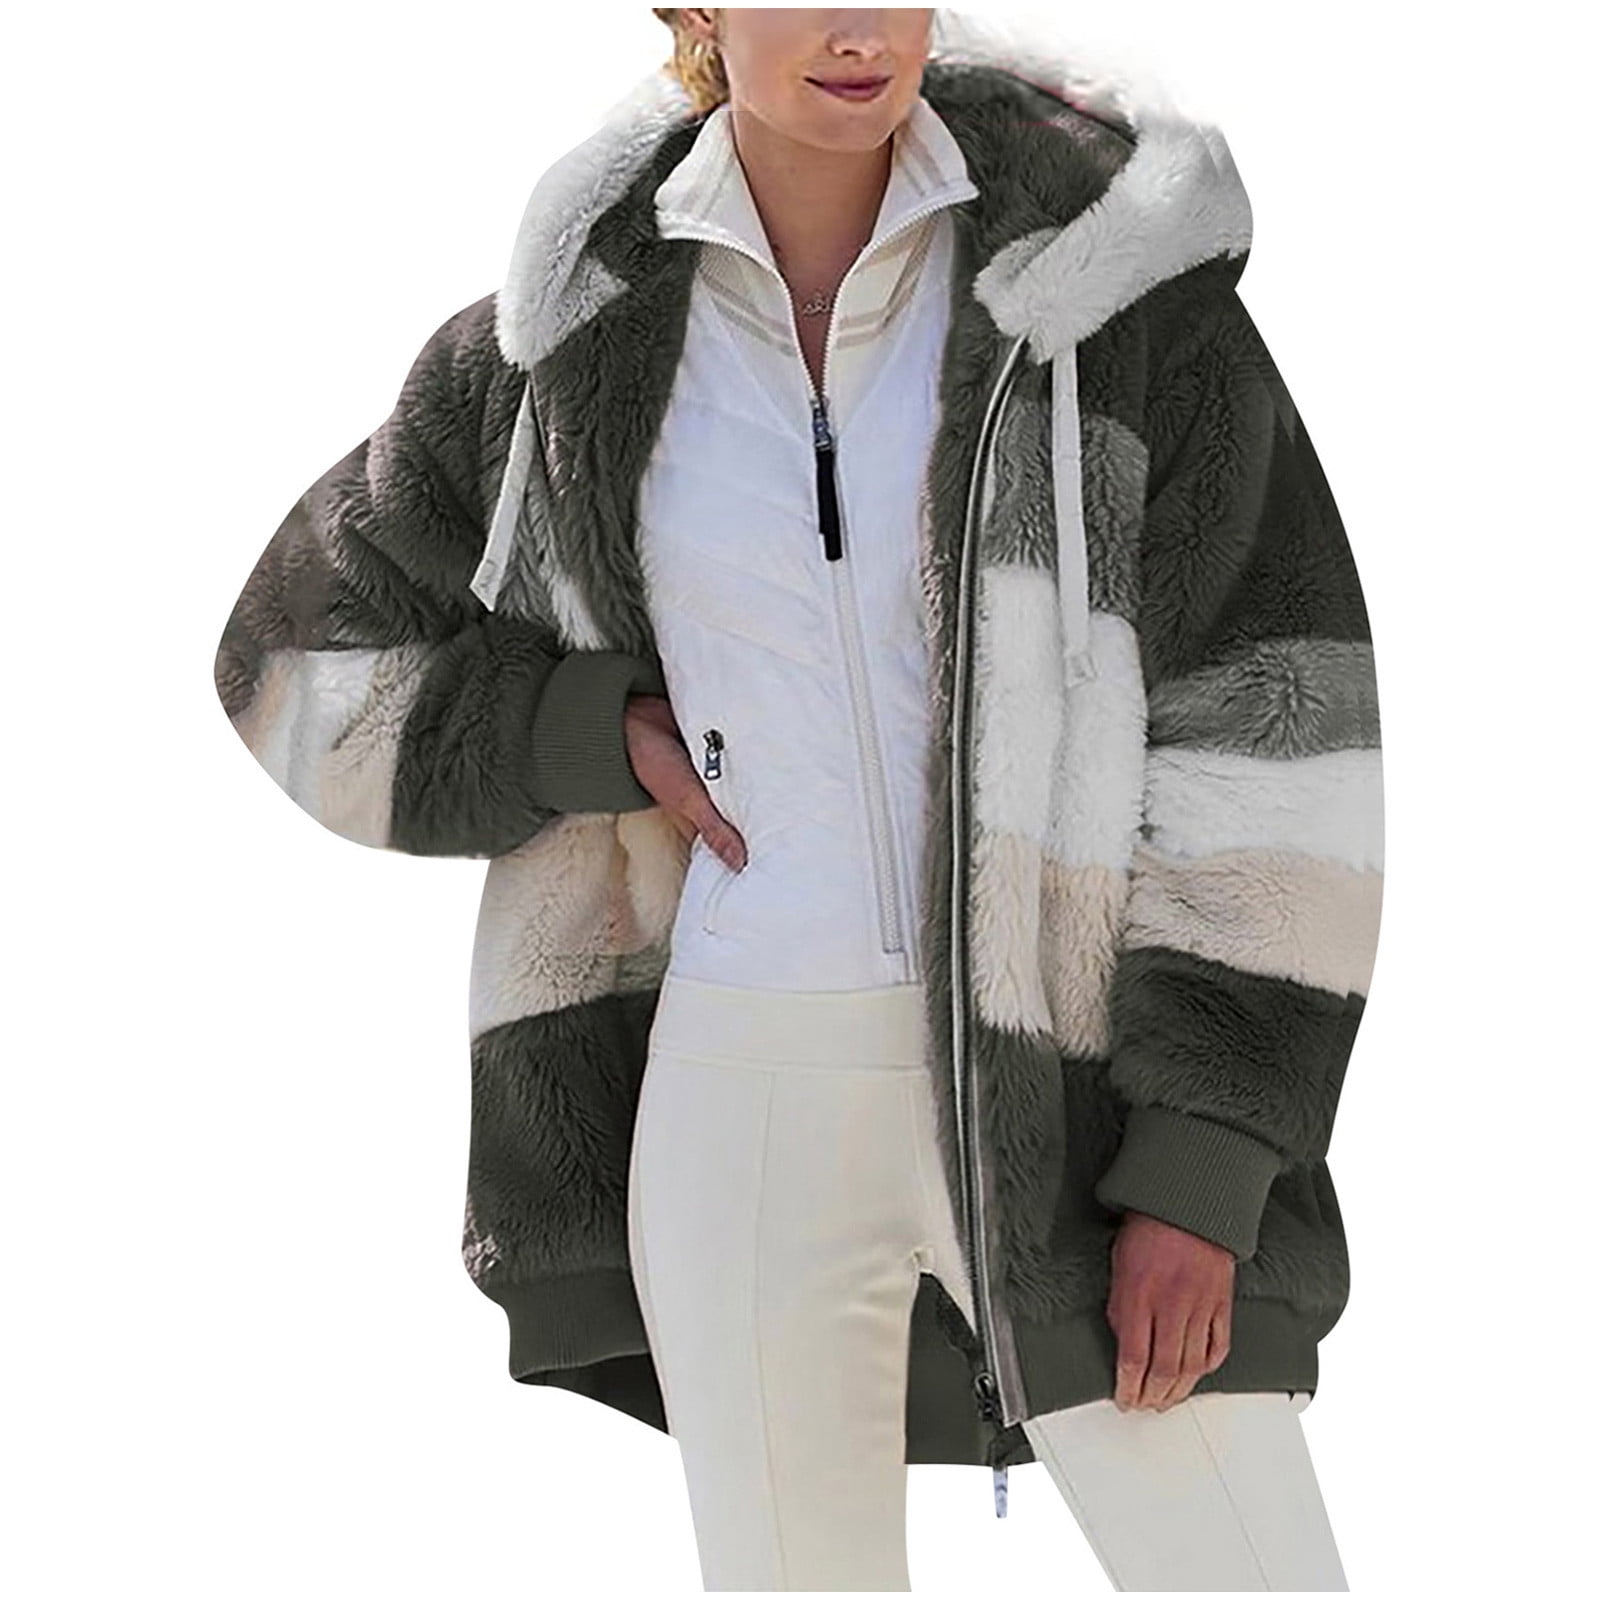 Shop the Warm Lamb Fleece Pocket Hooded Sports Sweater Coat Women at Swaggy  Fit